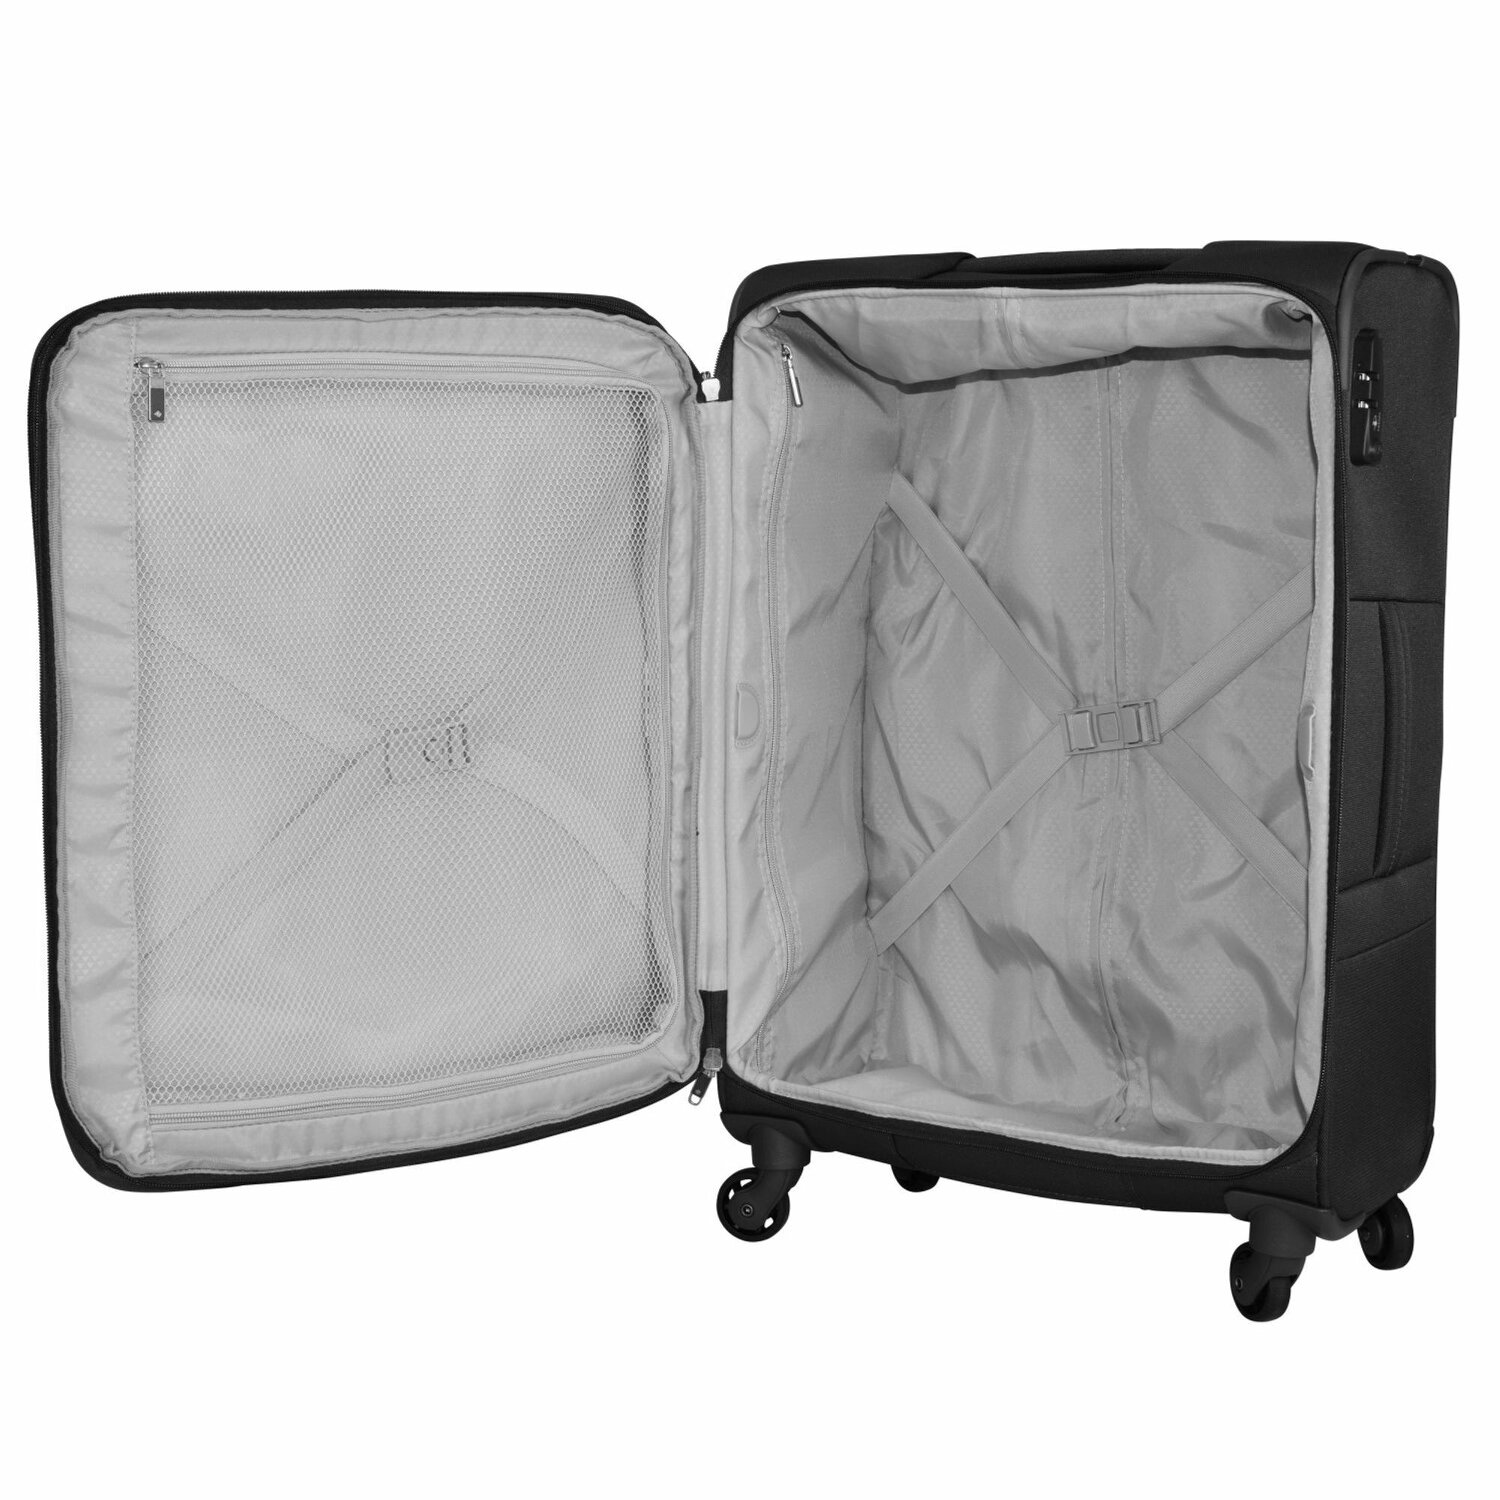 Valise spinner American Tourister Bon Air 66 cm Taille M 4 roues